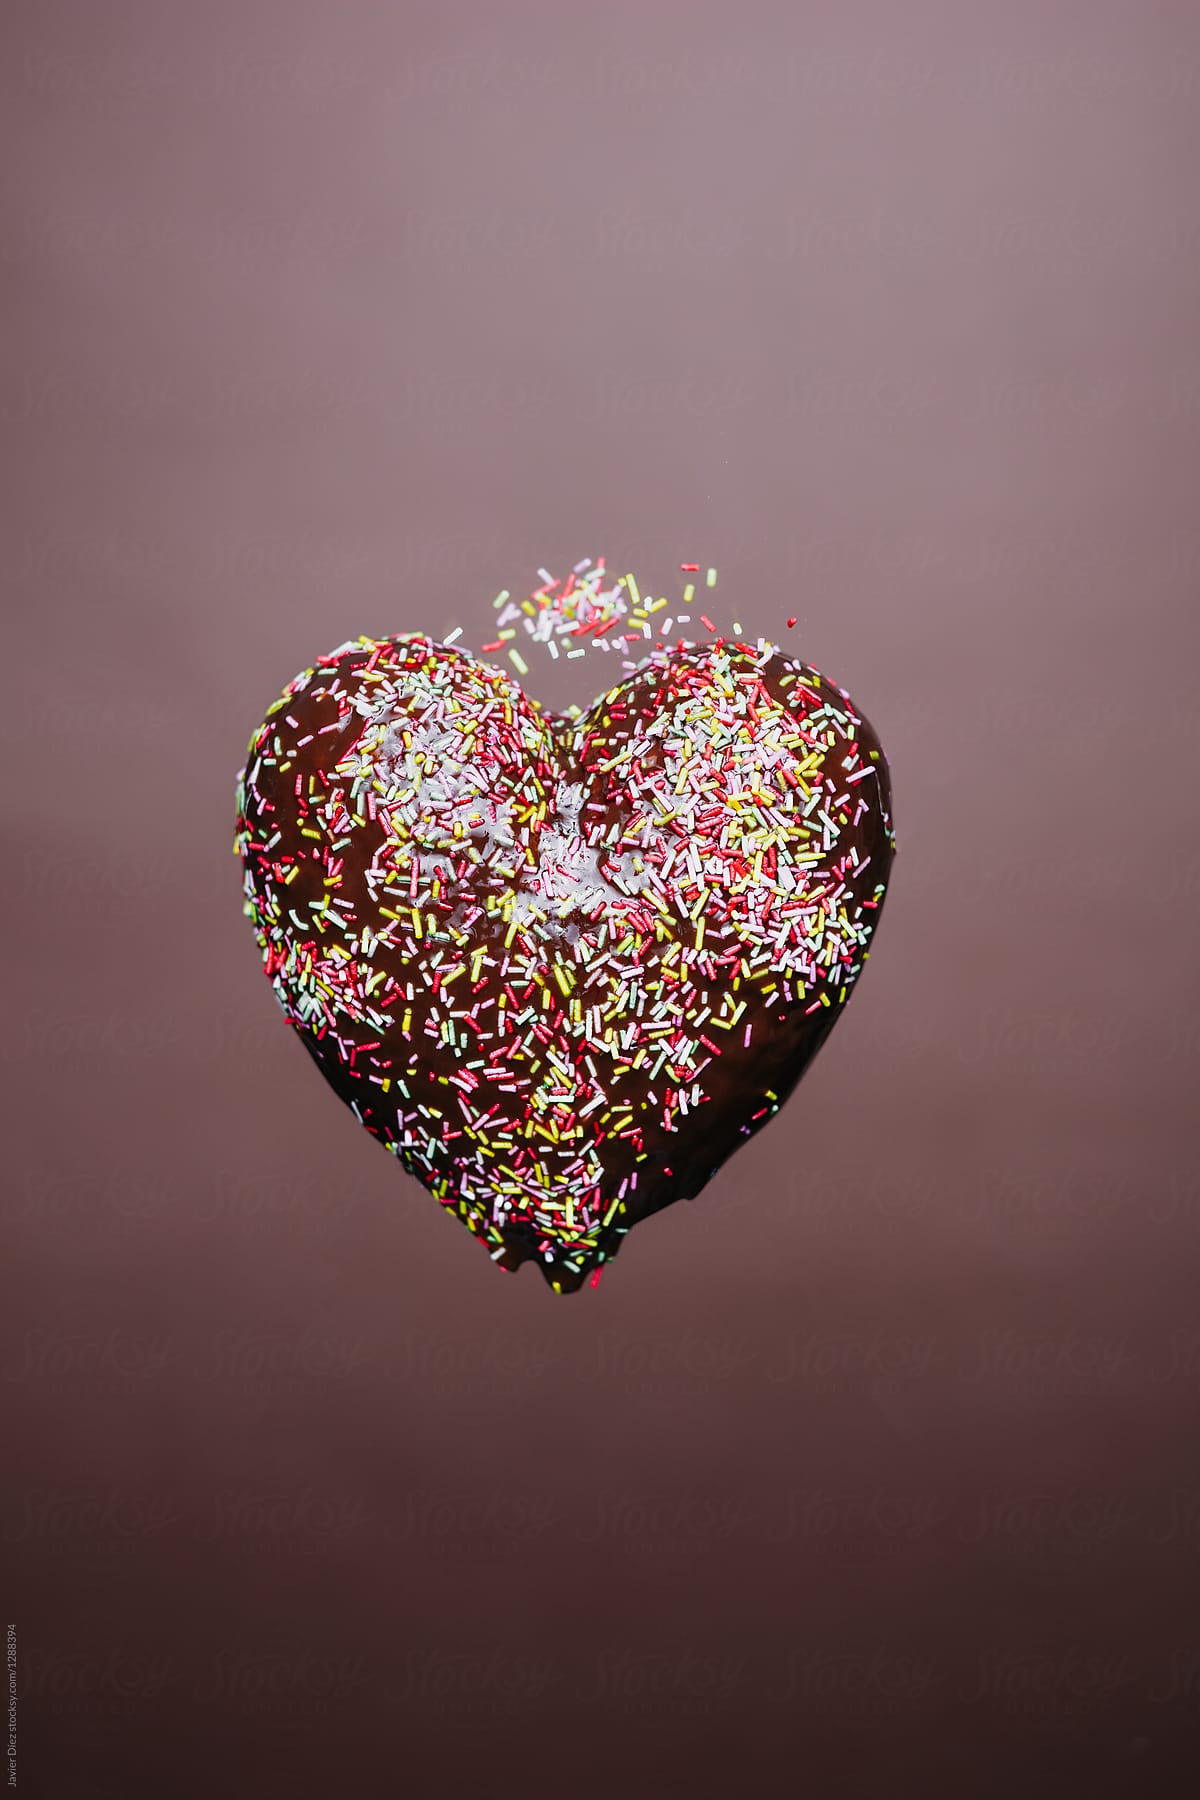 Chocolate heart with colorful sprinkles